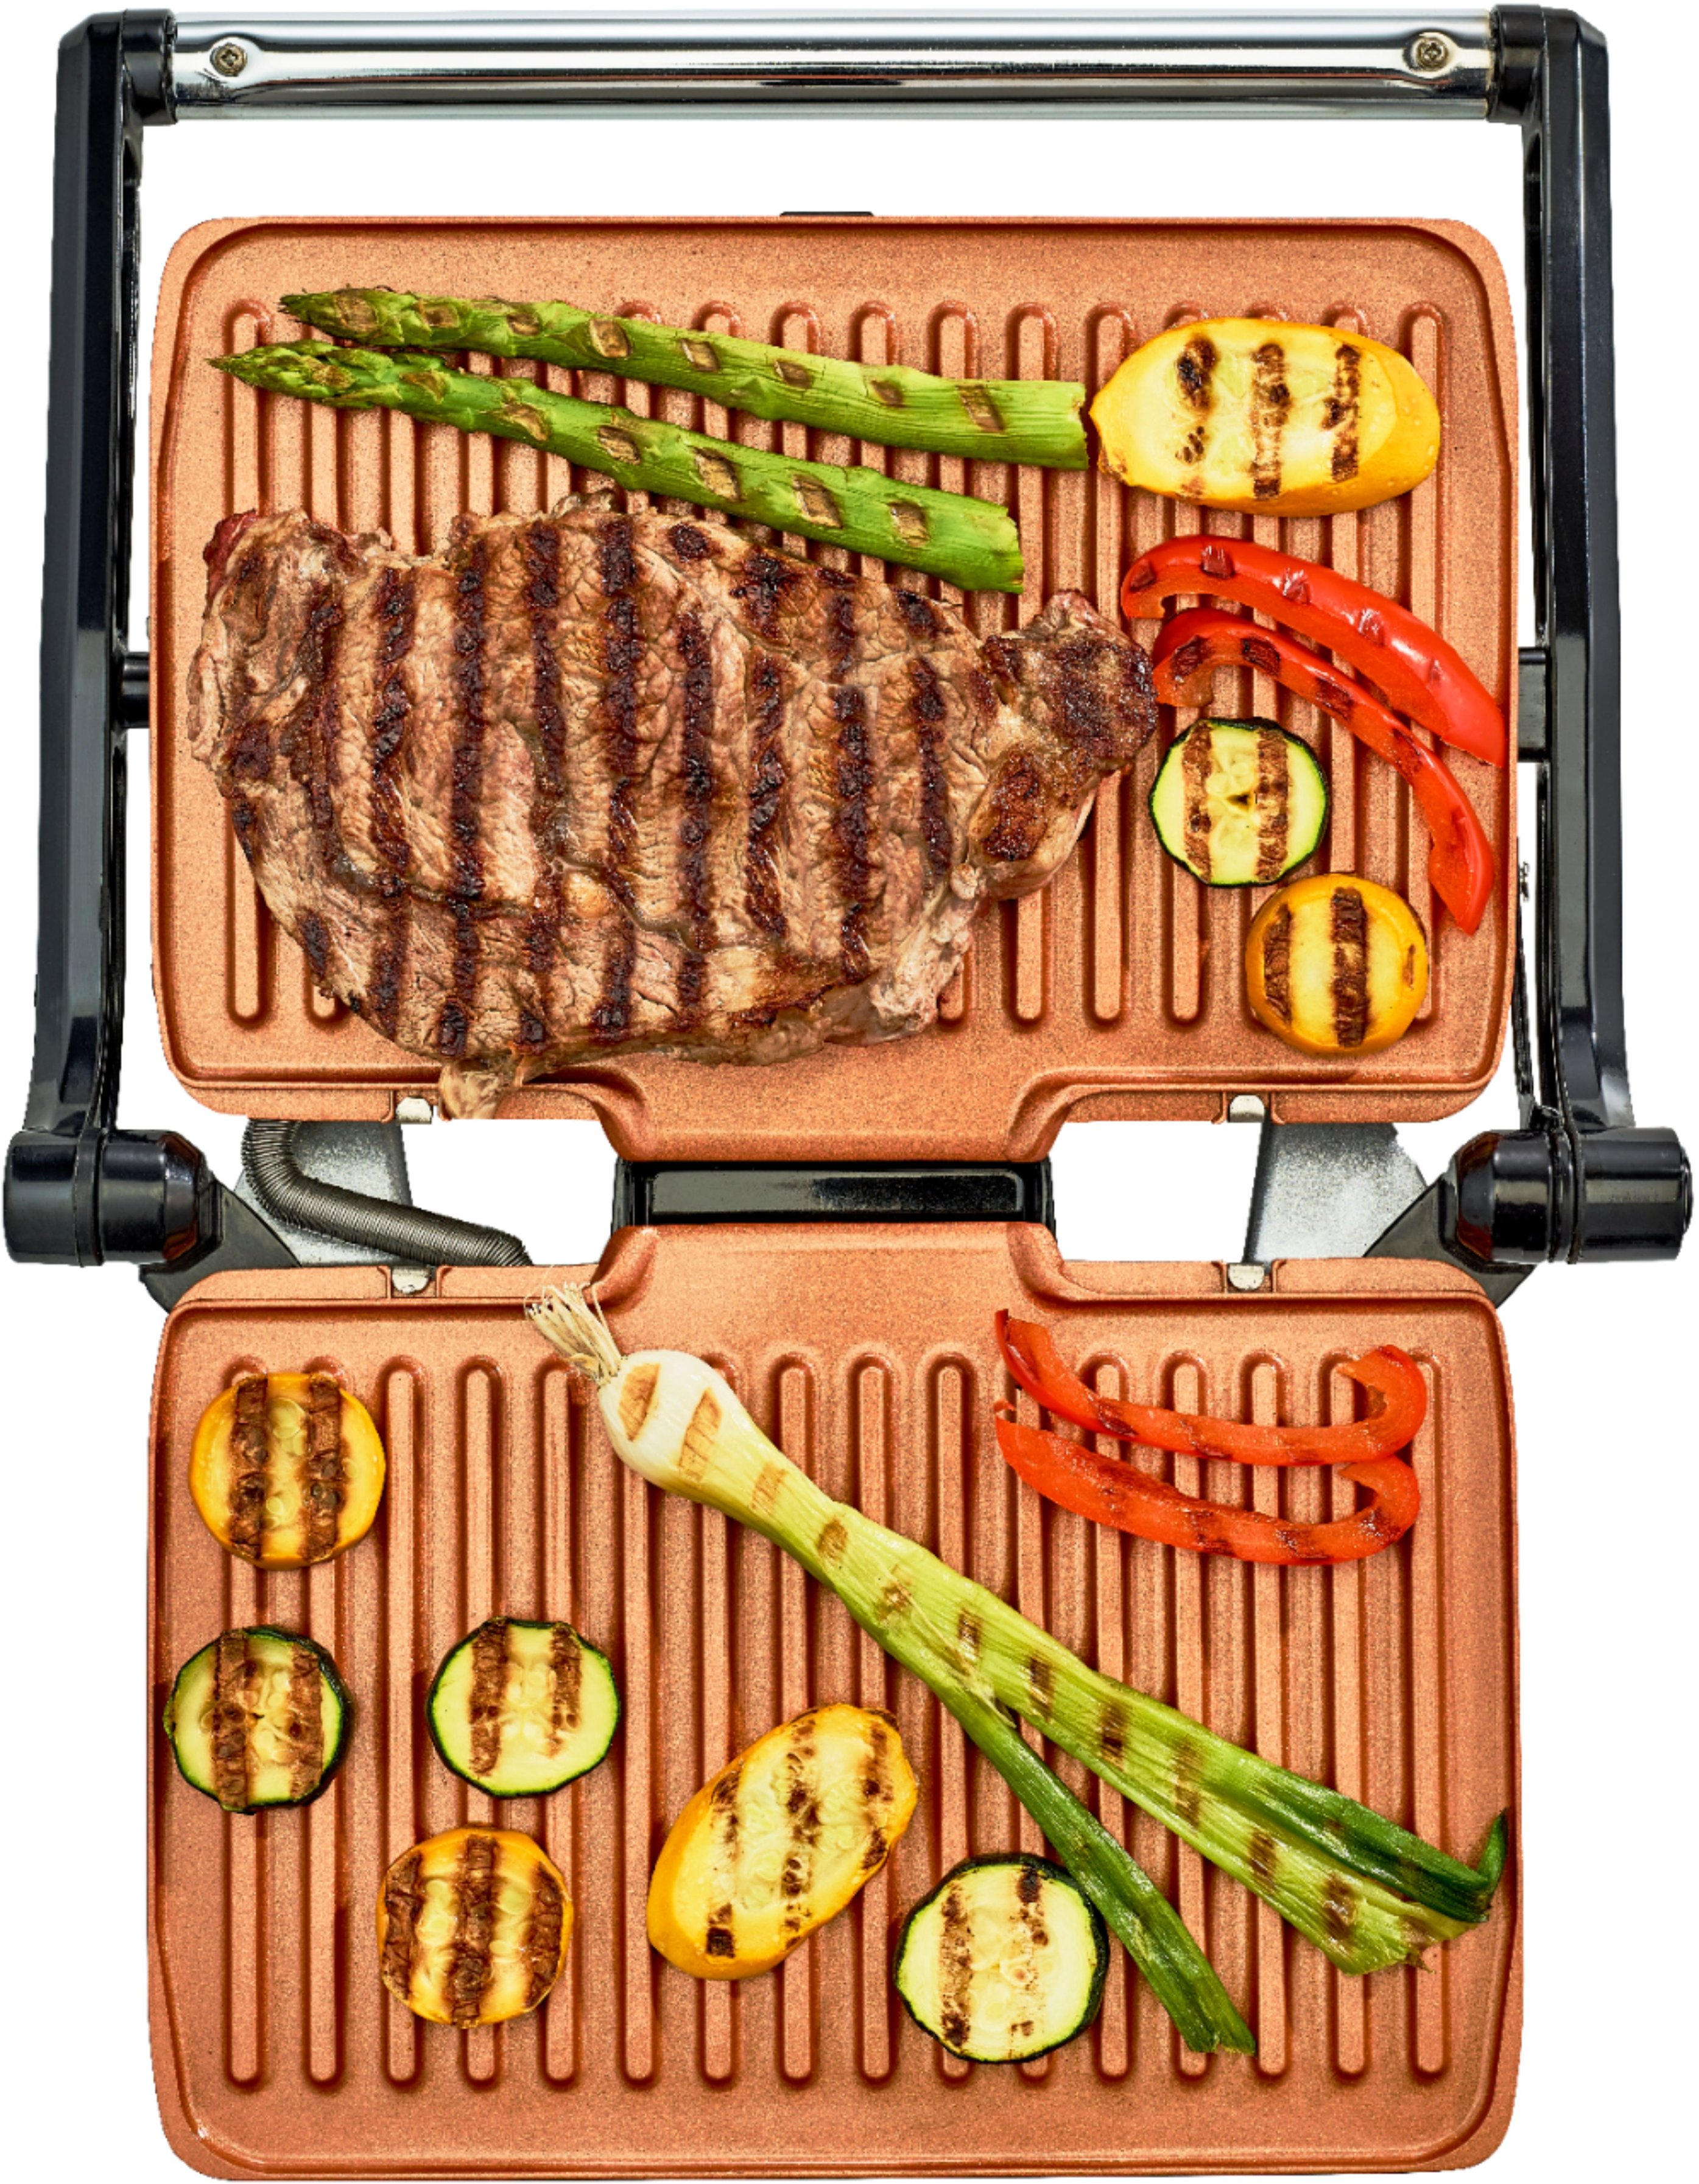 Grill It! Stovetop Grill NOW 66% Discounted down to $19